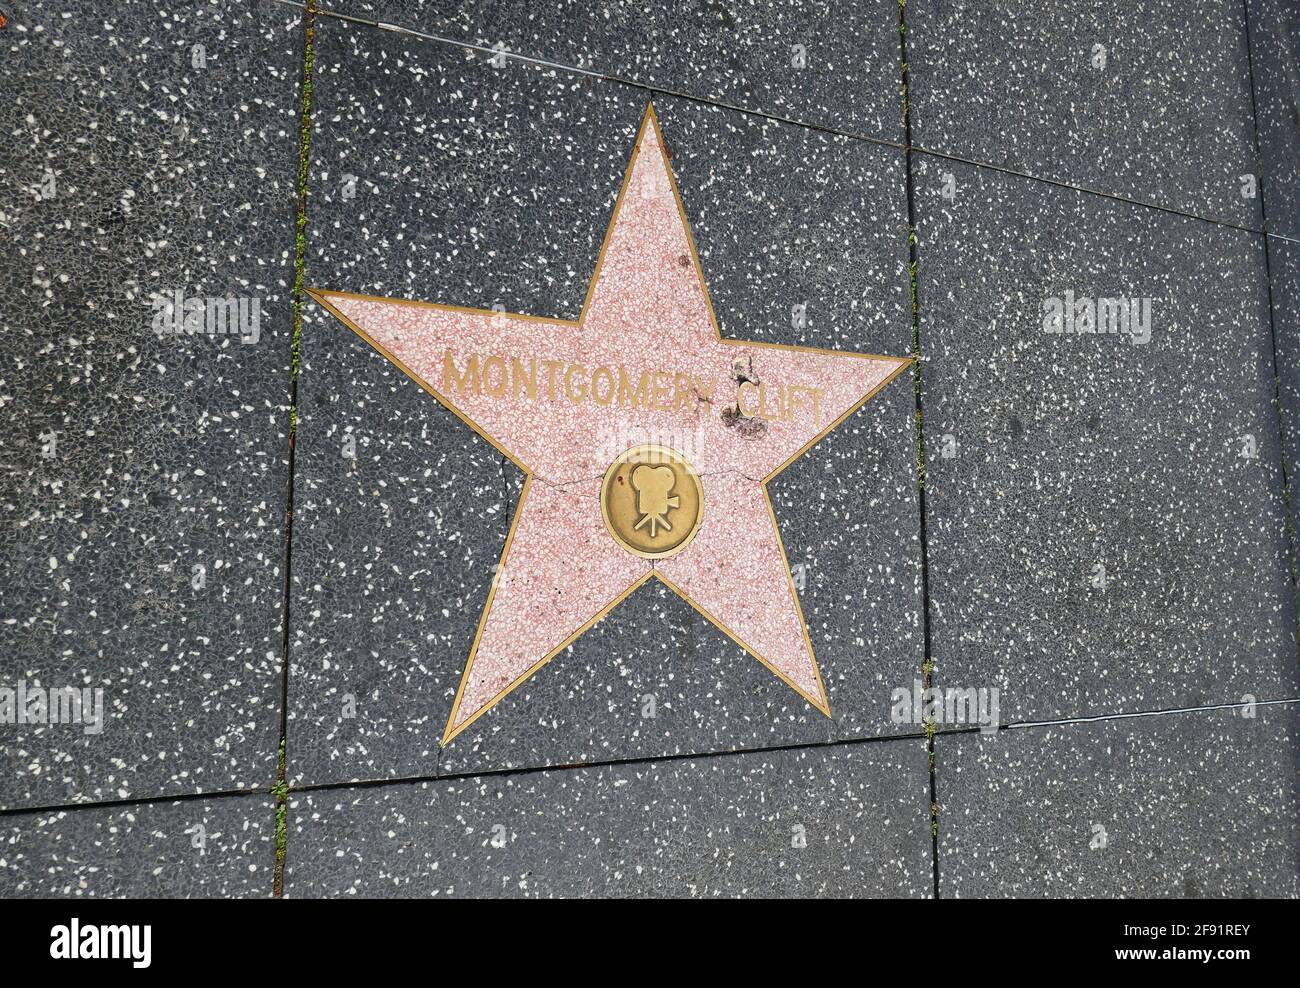 Hollywood, California, USA 14th April 2021 A general view of atmosphere of actor Montgomery Clift's Star on Hollywood Walk of Fame on April 14, 2021 in Hollywood, California, USA. Photo by Barry King/Alamy Stock Photo Stock Photo